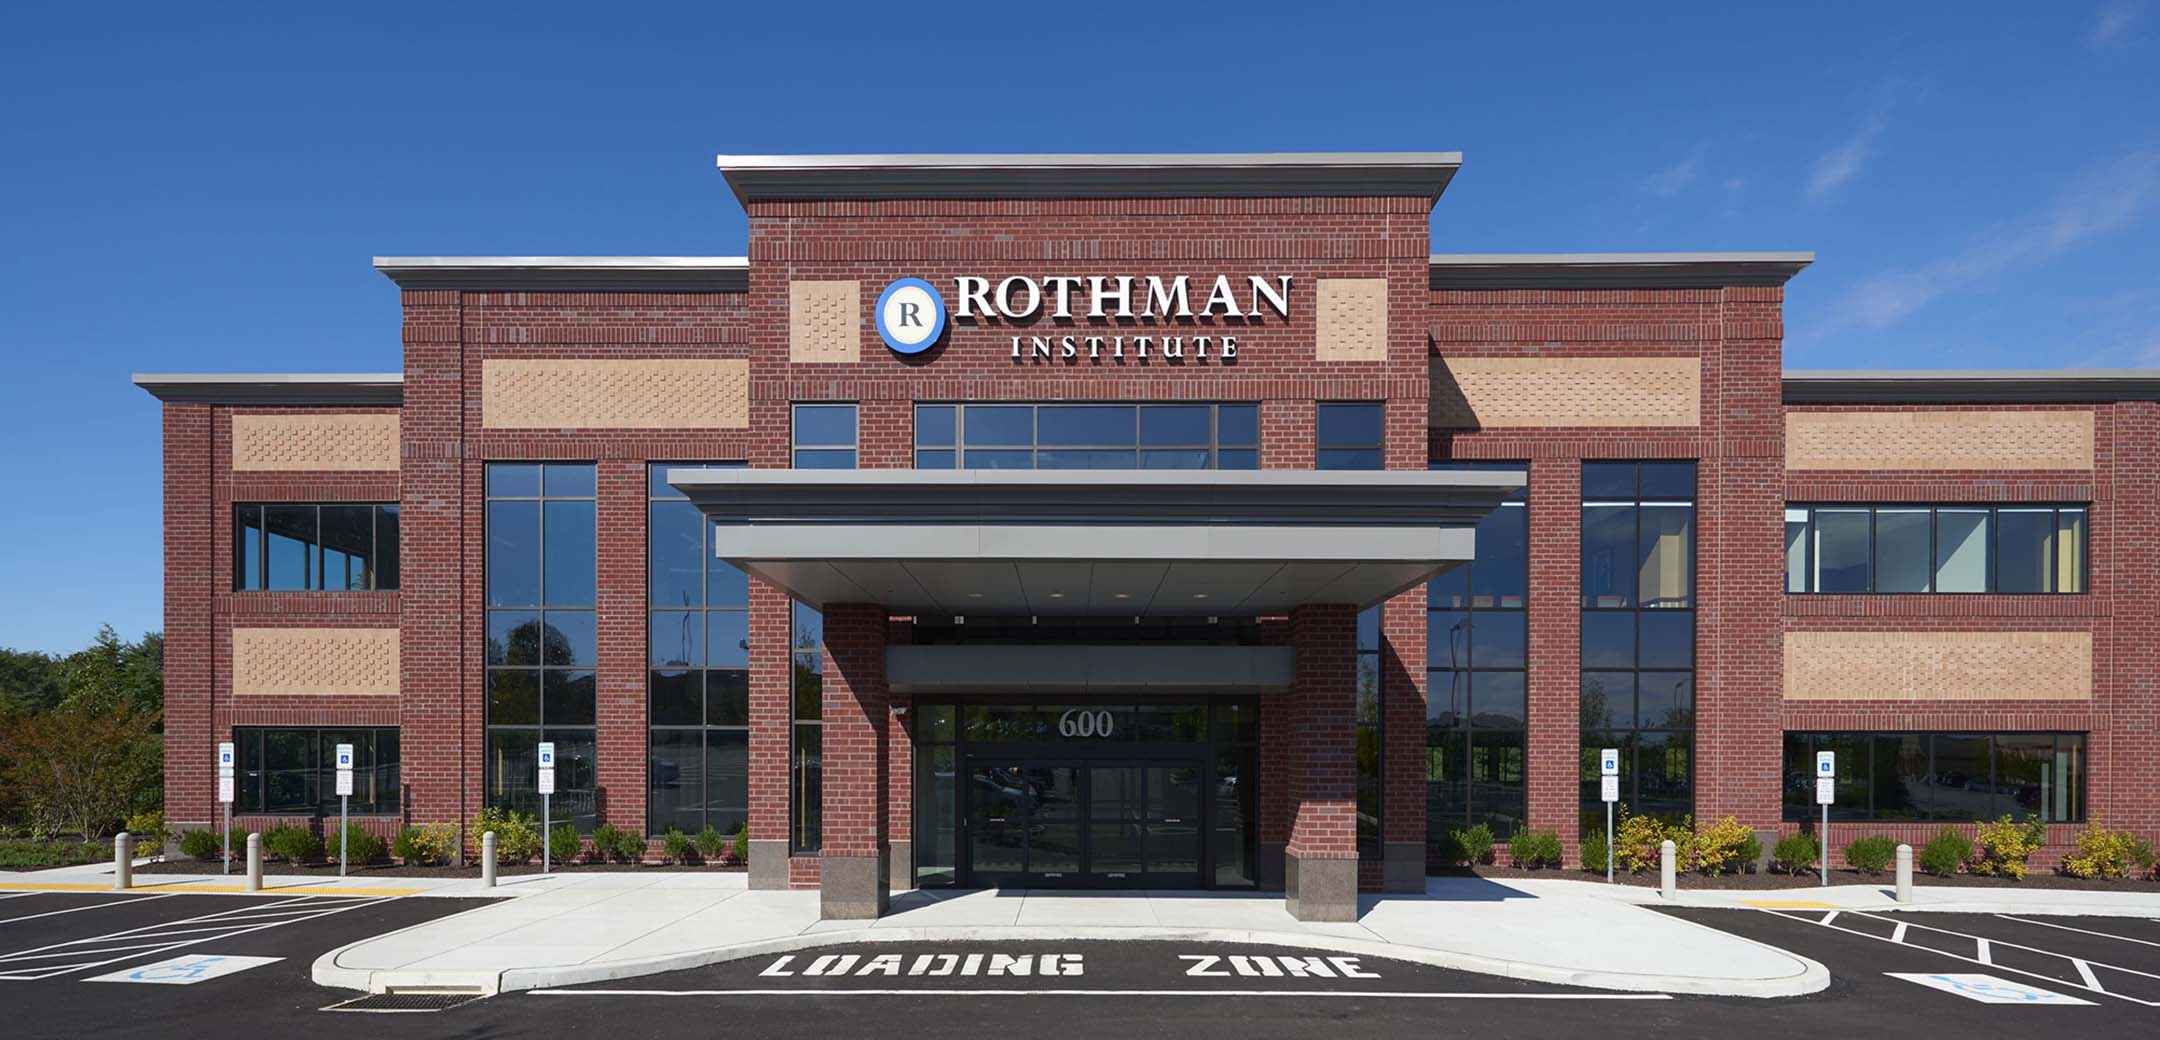 The exterior of the Rothman Brinton Lakes red brick building front entrance showcasing the stepped design and entrance overhang.